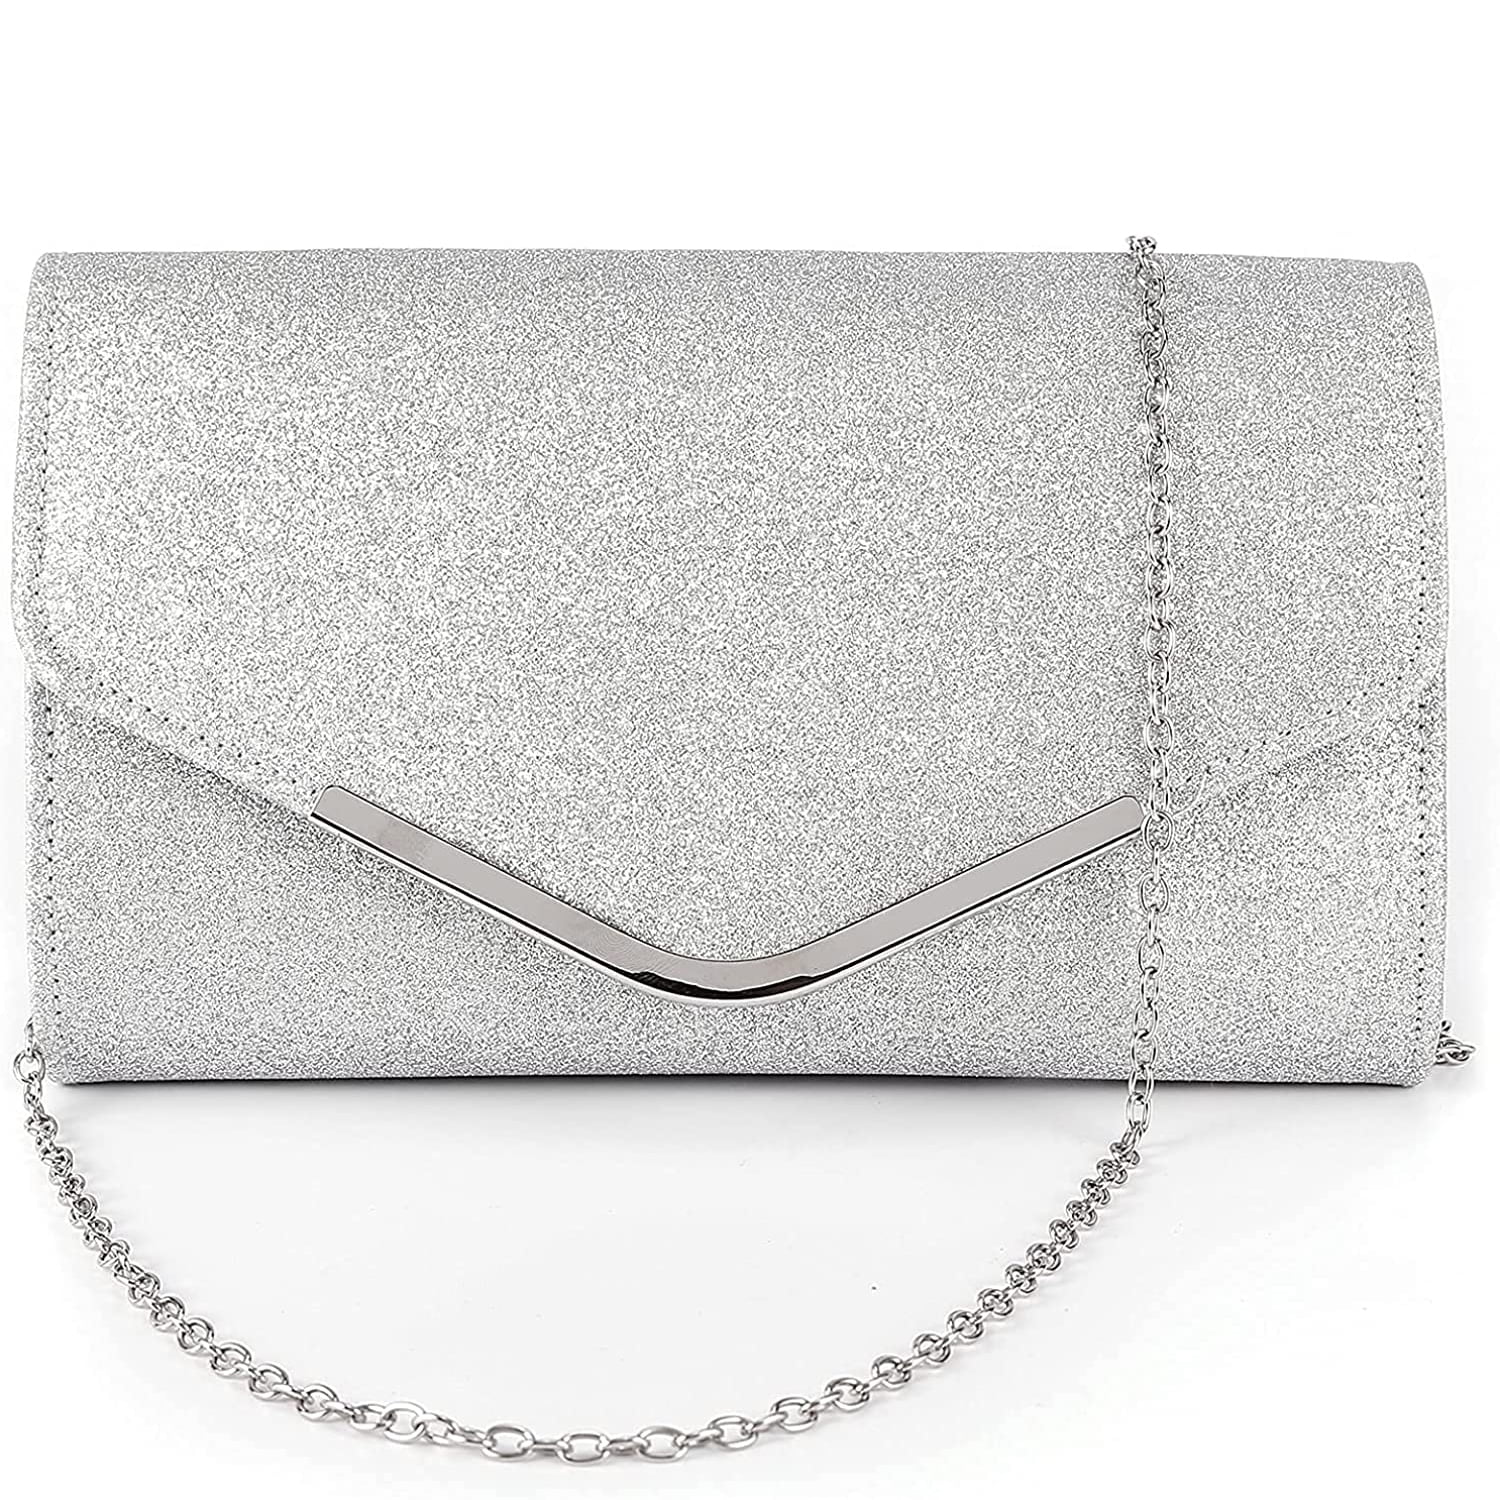 Buy Silver Clutch With Chain And Thread Embellishment KALKI Fashion India